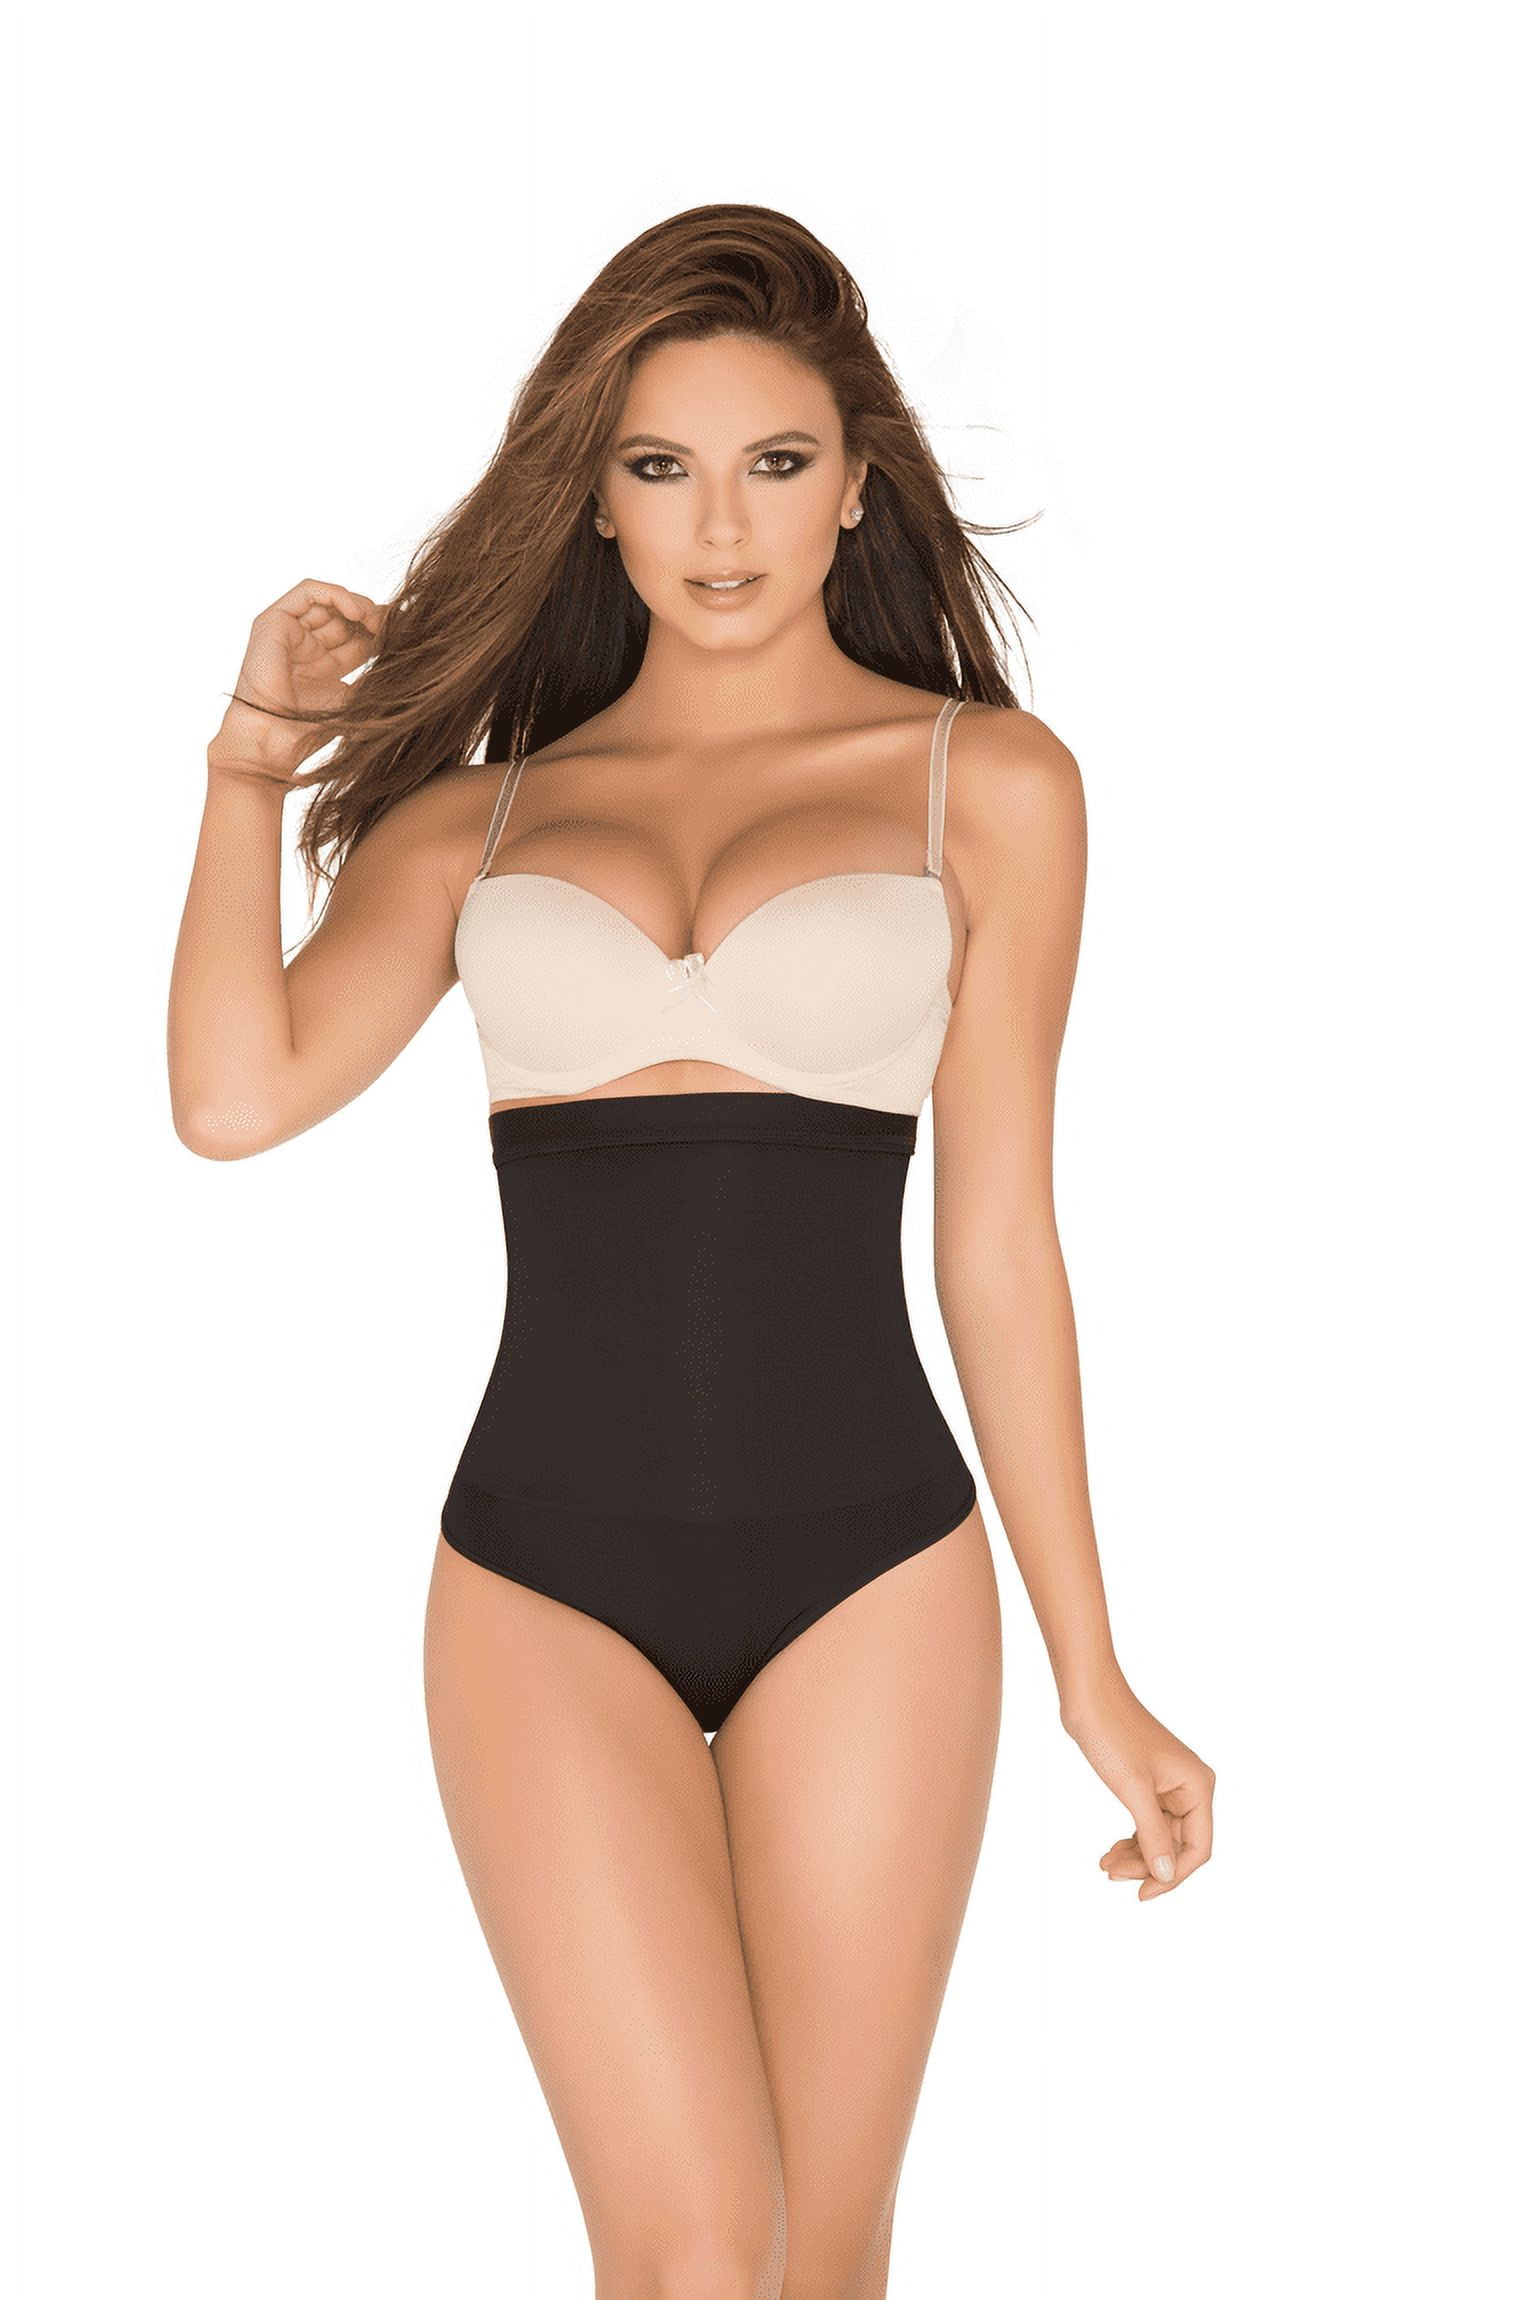 Premium Colombian Shapewear Strapless Low Back Slimming Bodysuit Faja.  Smoothing Firm Control Body Shaper 